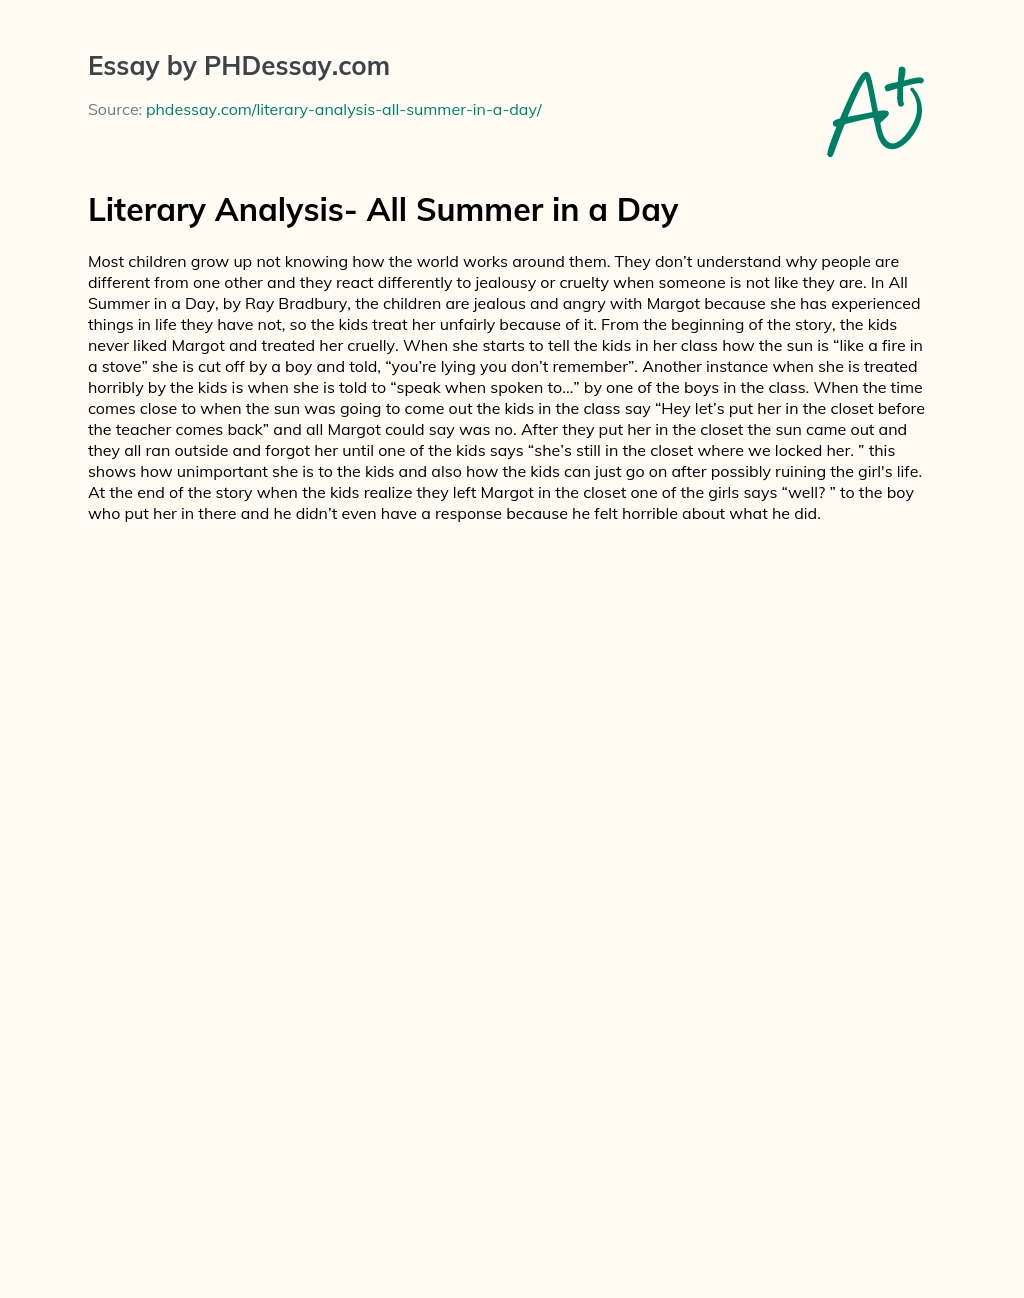 Literary Analysis- All Summer in a Day essay